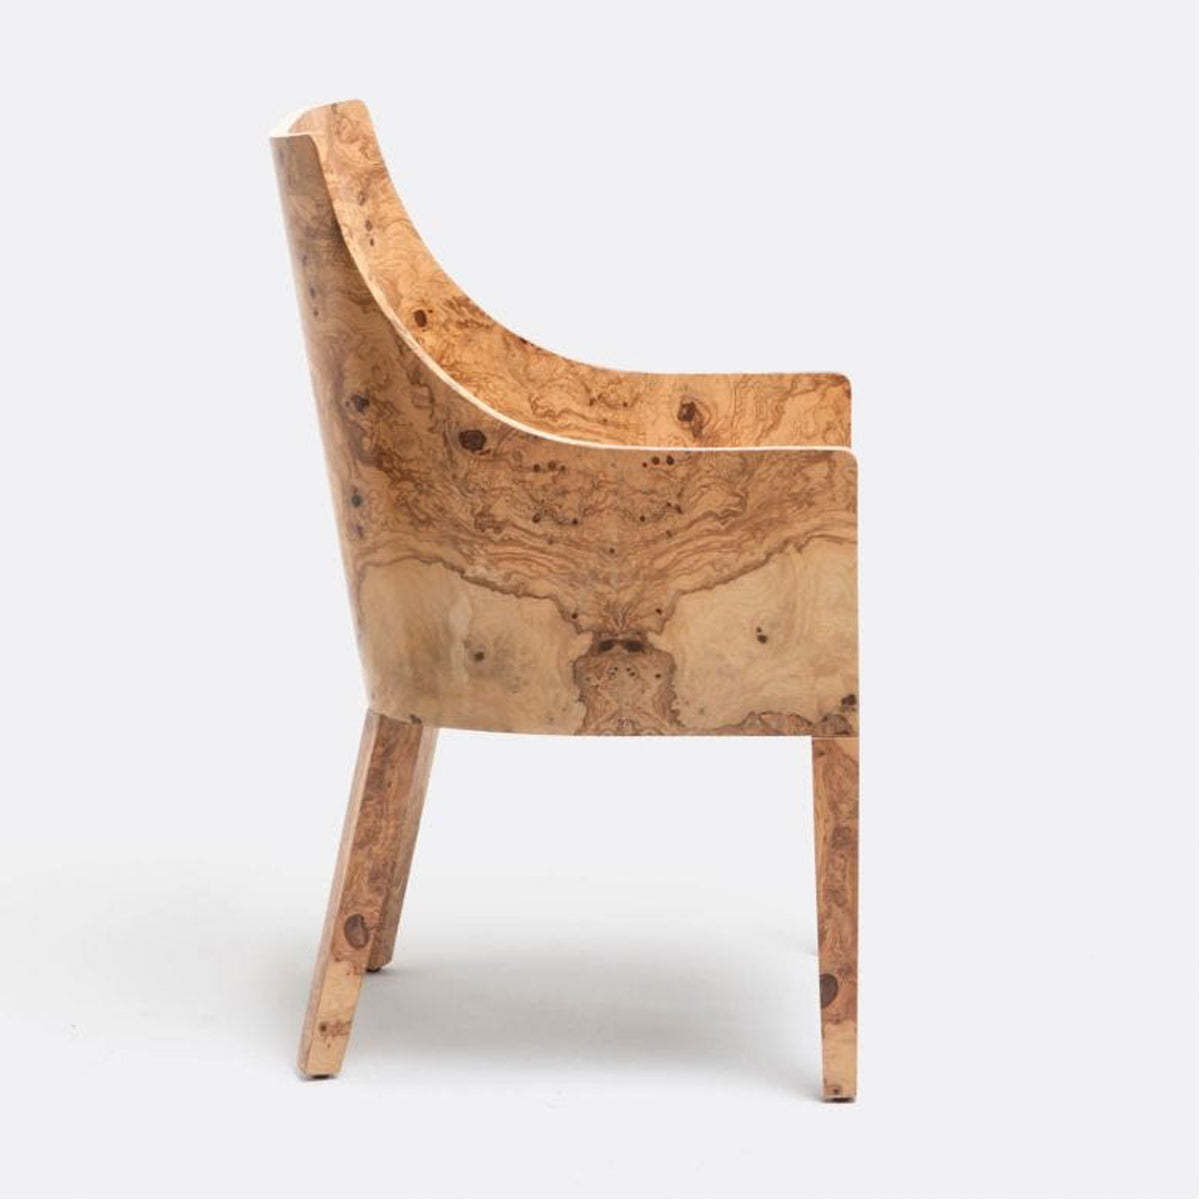 Made Goods Everett Olive Ash Arm Chair in Mondego Cotton Jute